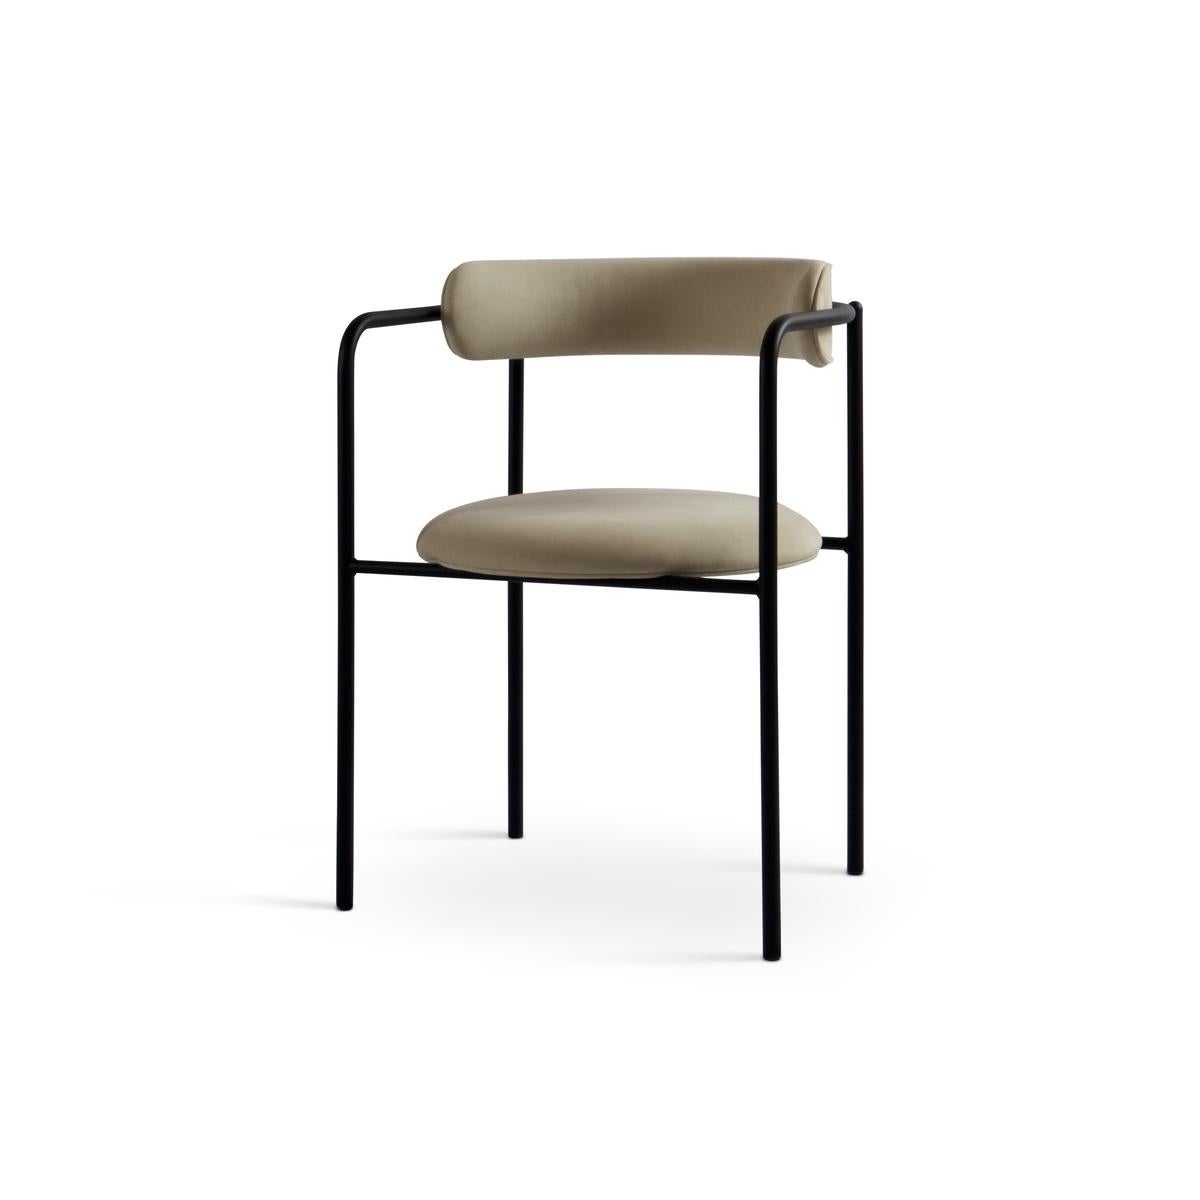 Contemporary Chair 'FF 4-Legs', Vidar Fabric, Black 1880 and White 1880 For Sale 10